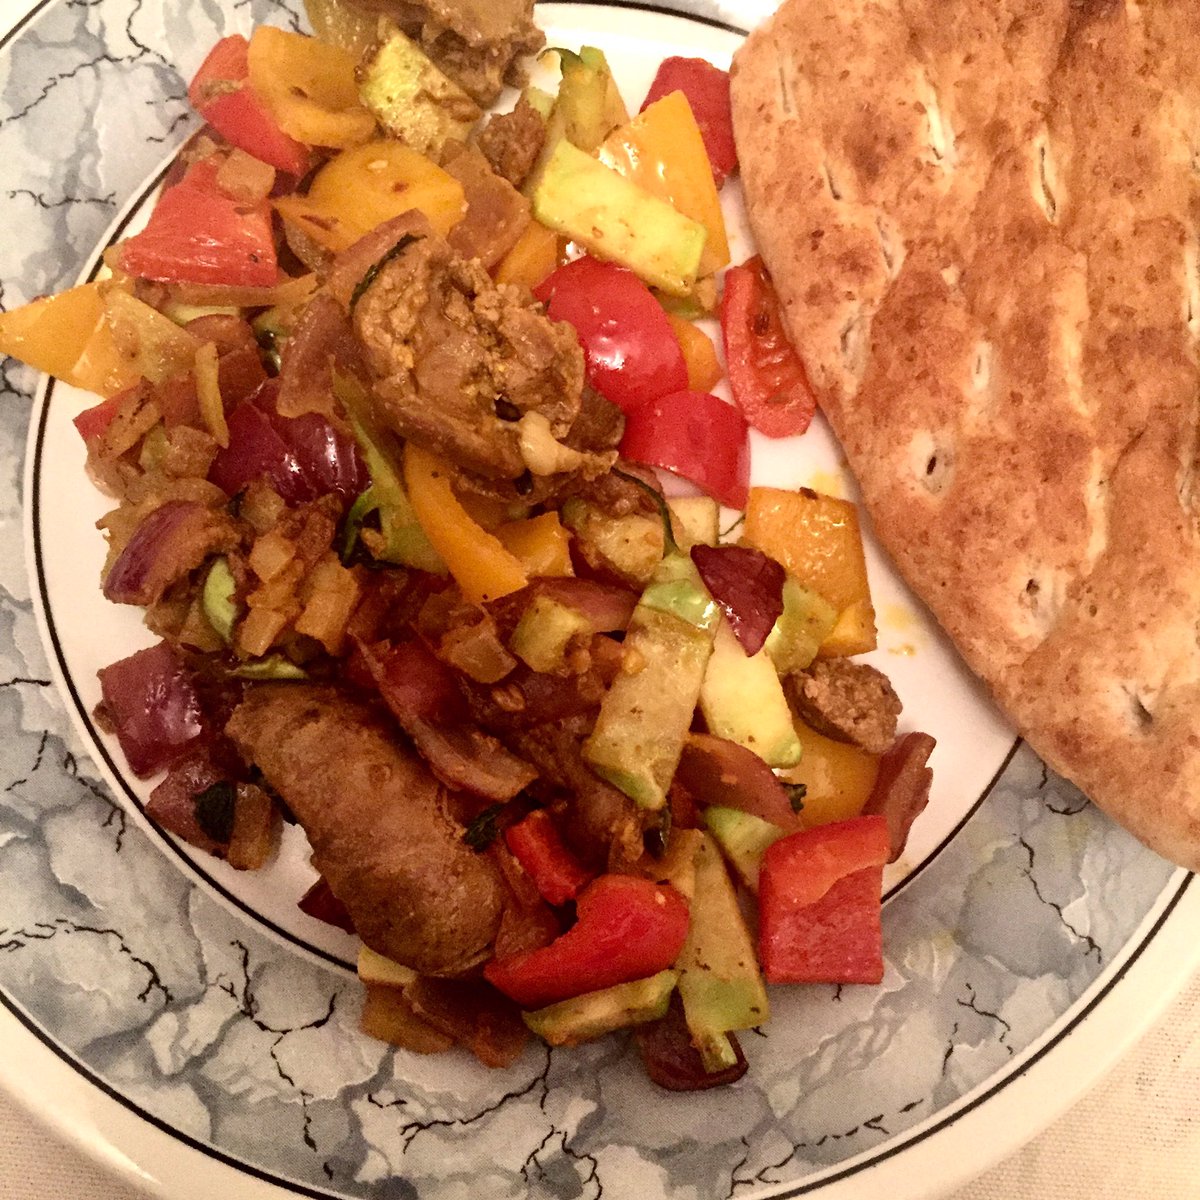 #weekdaymeal #chickenliver #spicyliver cooked in yoghurt,spices #fenugreek and garlic with #stirfry #peppers #flatbread #EasterWeekend 🥘🐣❤